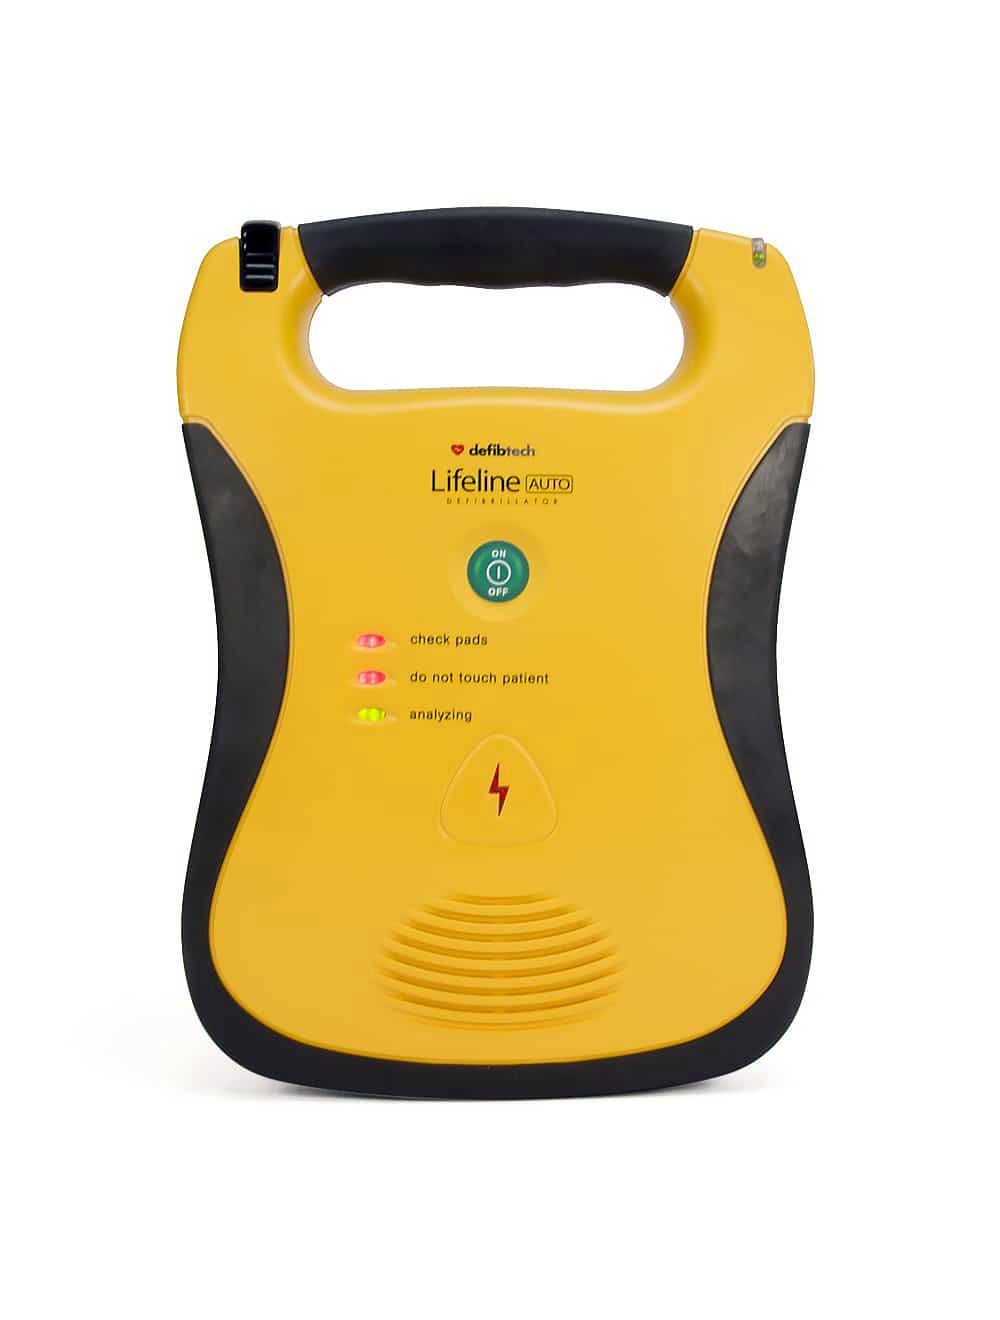 Defibtech Lifeline™ Fully-Automatic AED